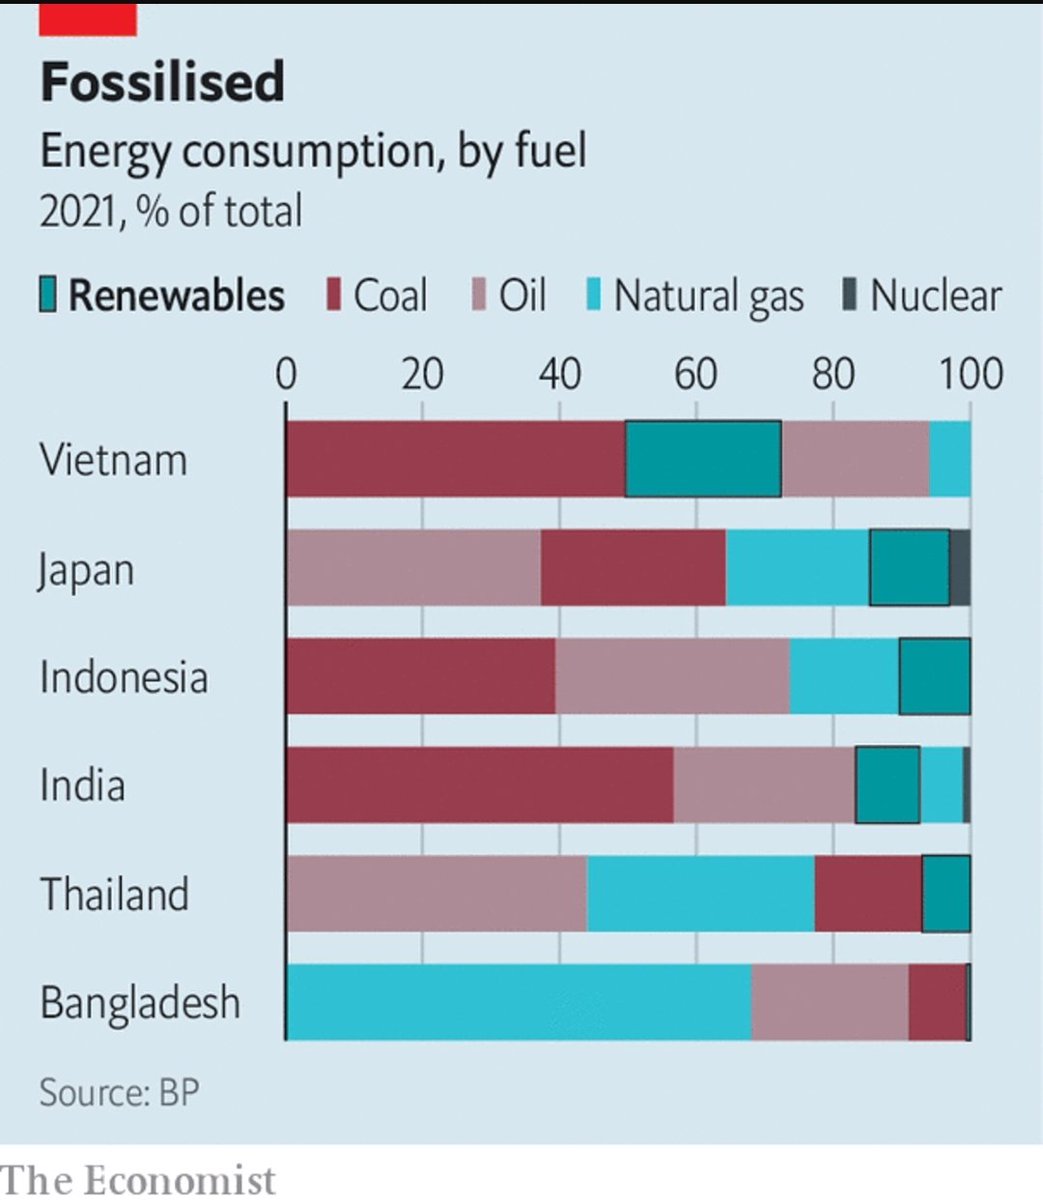 Energy demand is soaring in Asia's fast-growing economies. But fossil fuels are less and less competitive, and subject to political vagaries. @TheEconomist nails it: Asia’s future success and well-being depends on how fast it can green its energy supply. economist.com/asia/2022/10/1…